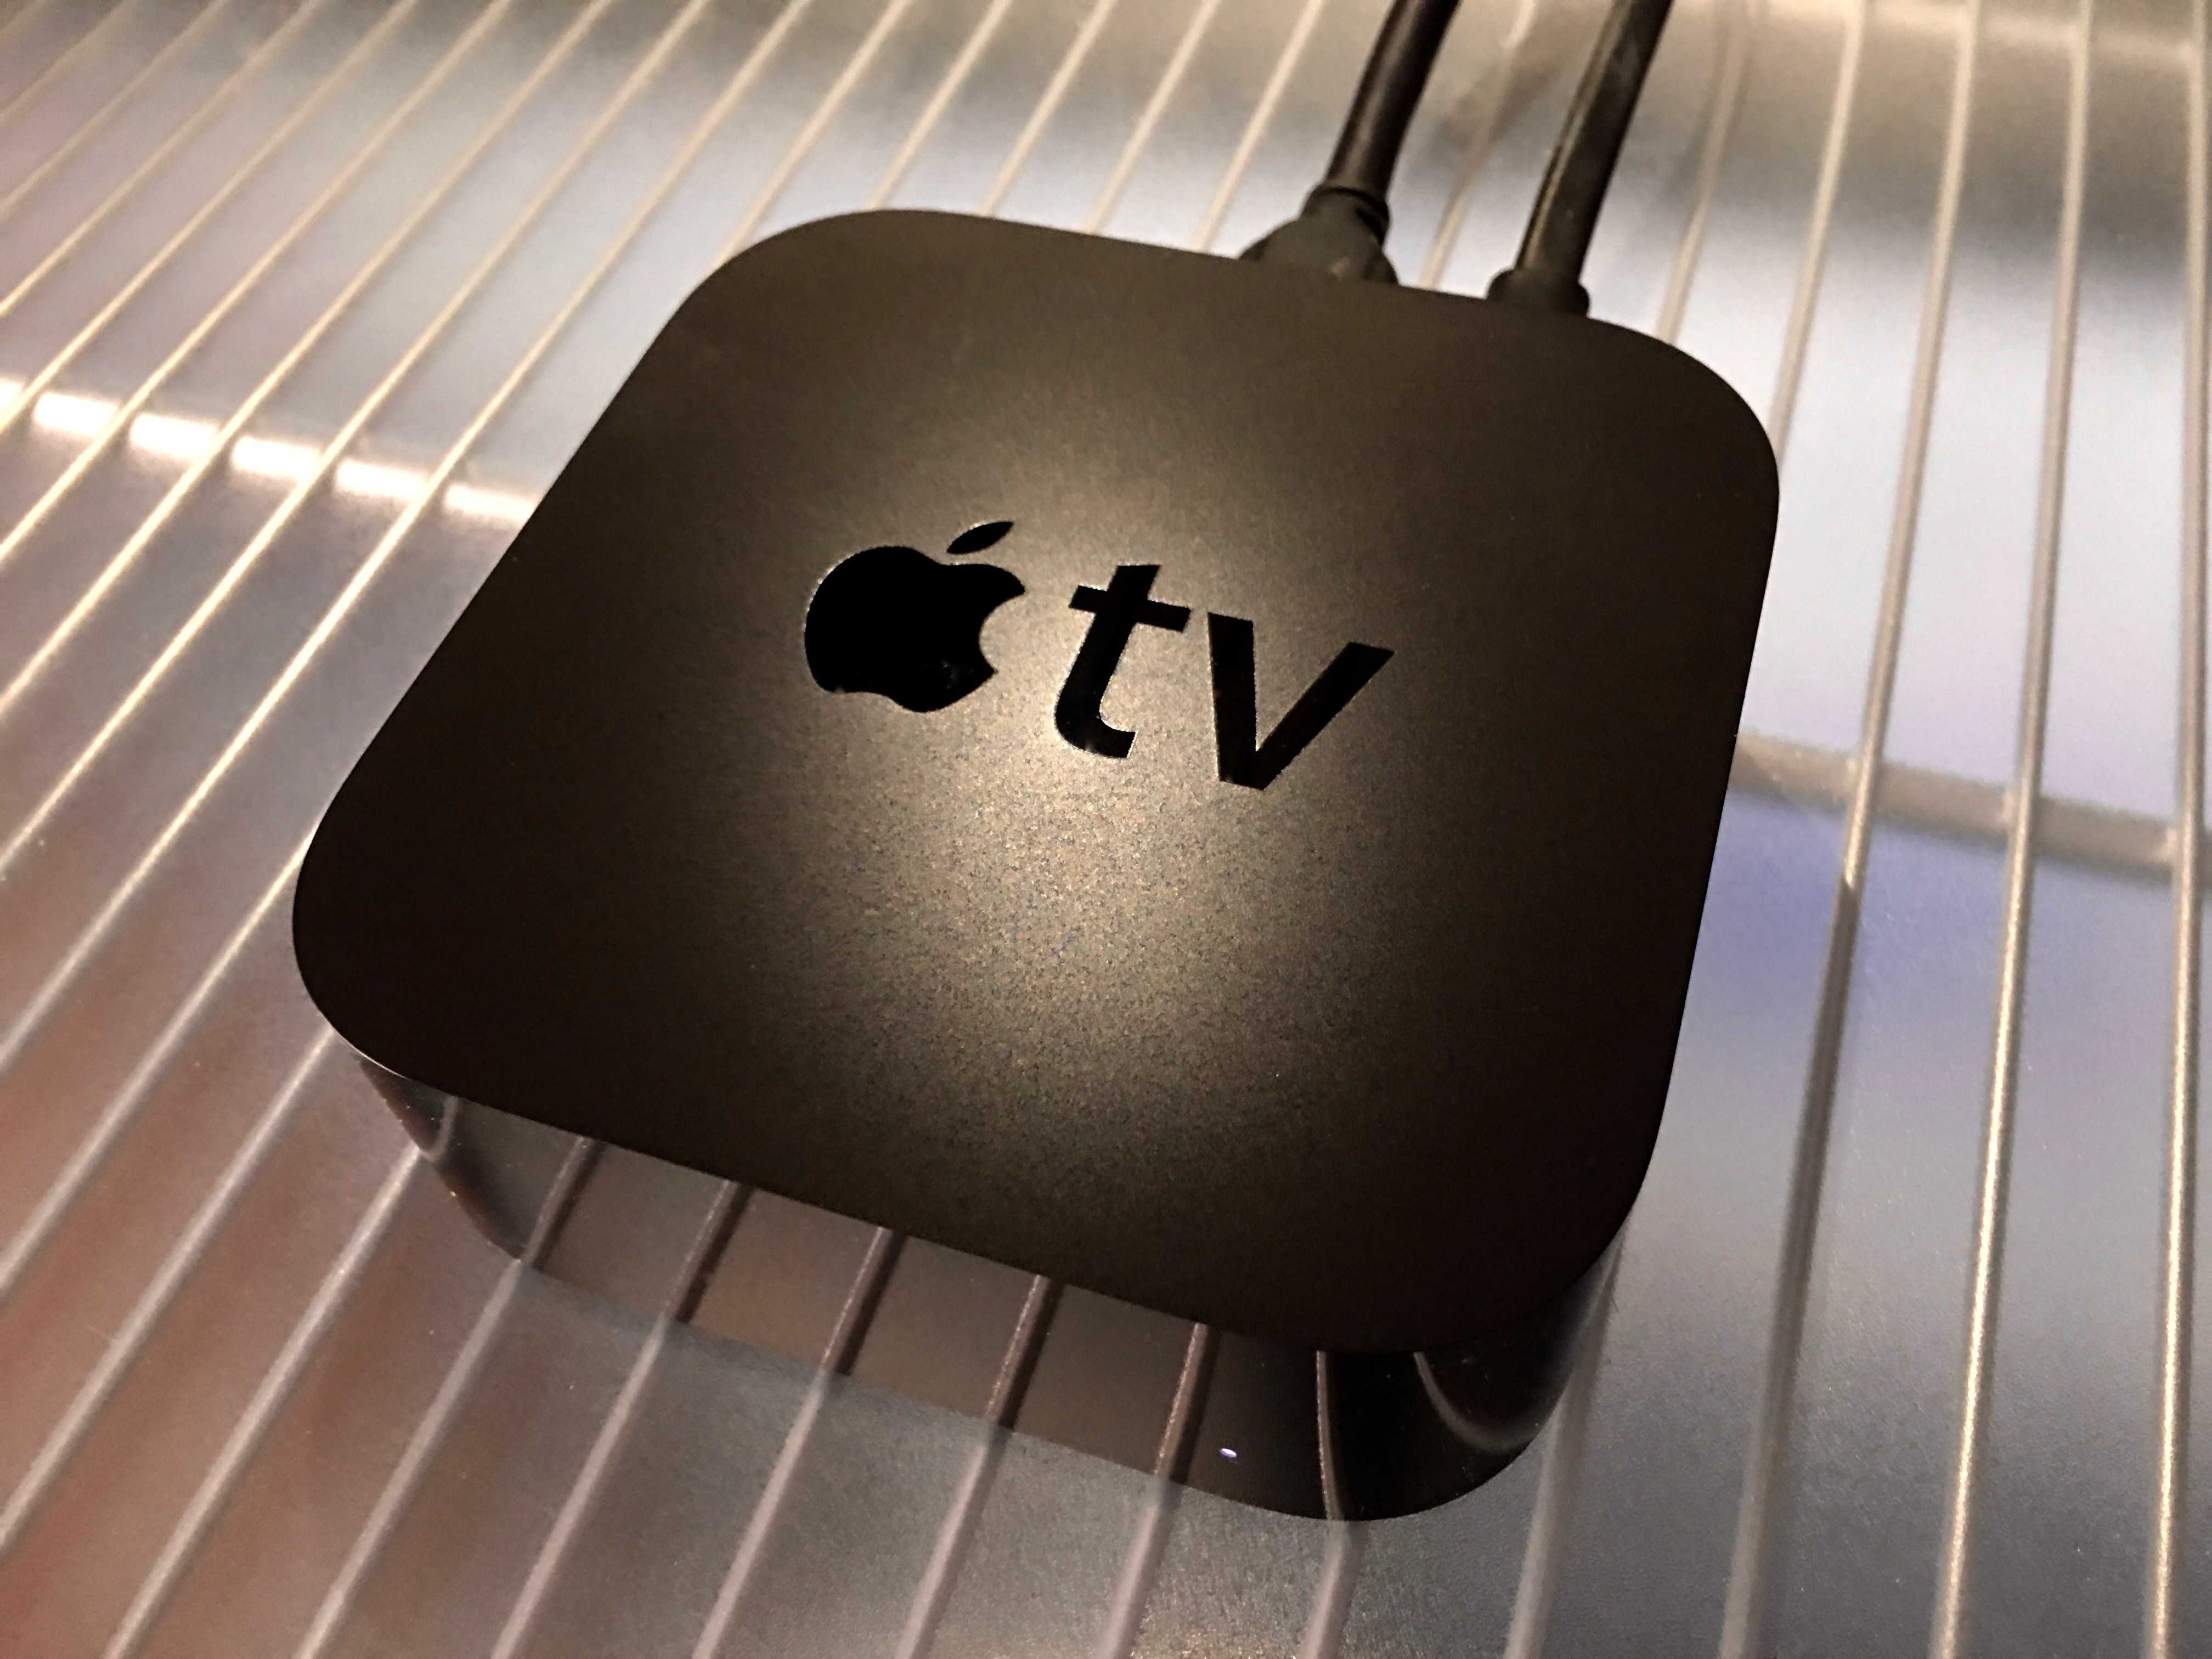 Reboot your Apple TV with style.